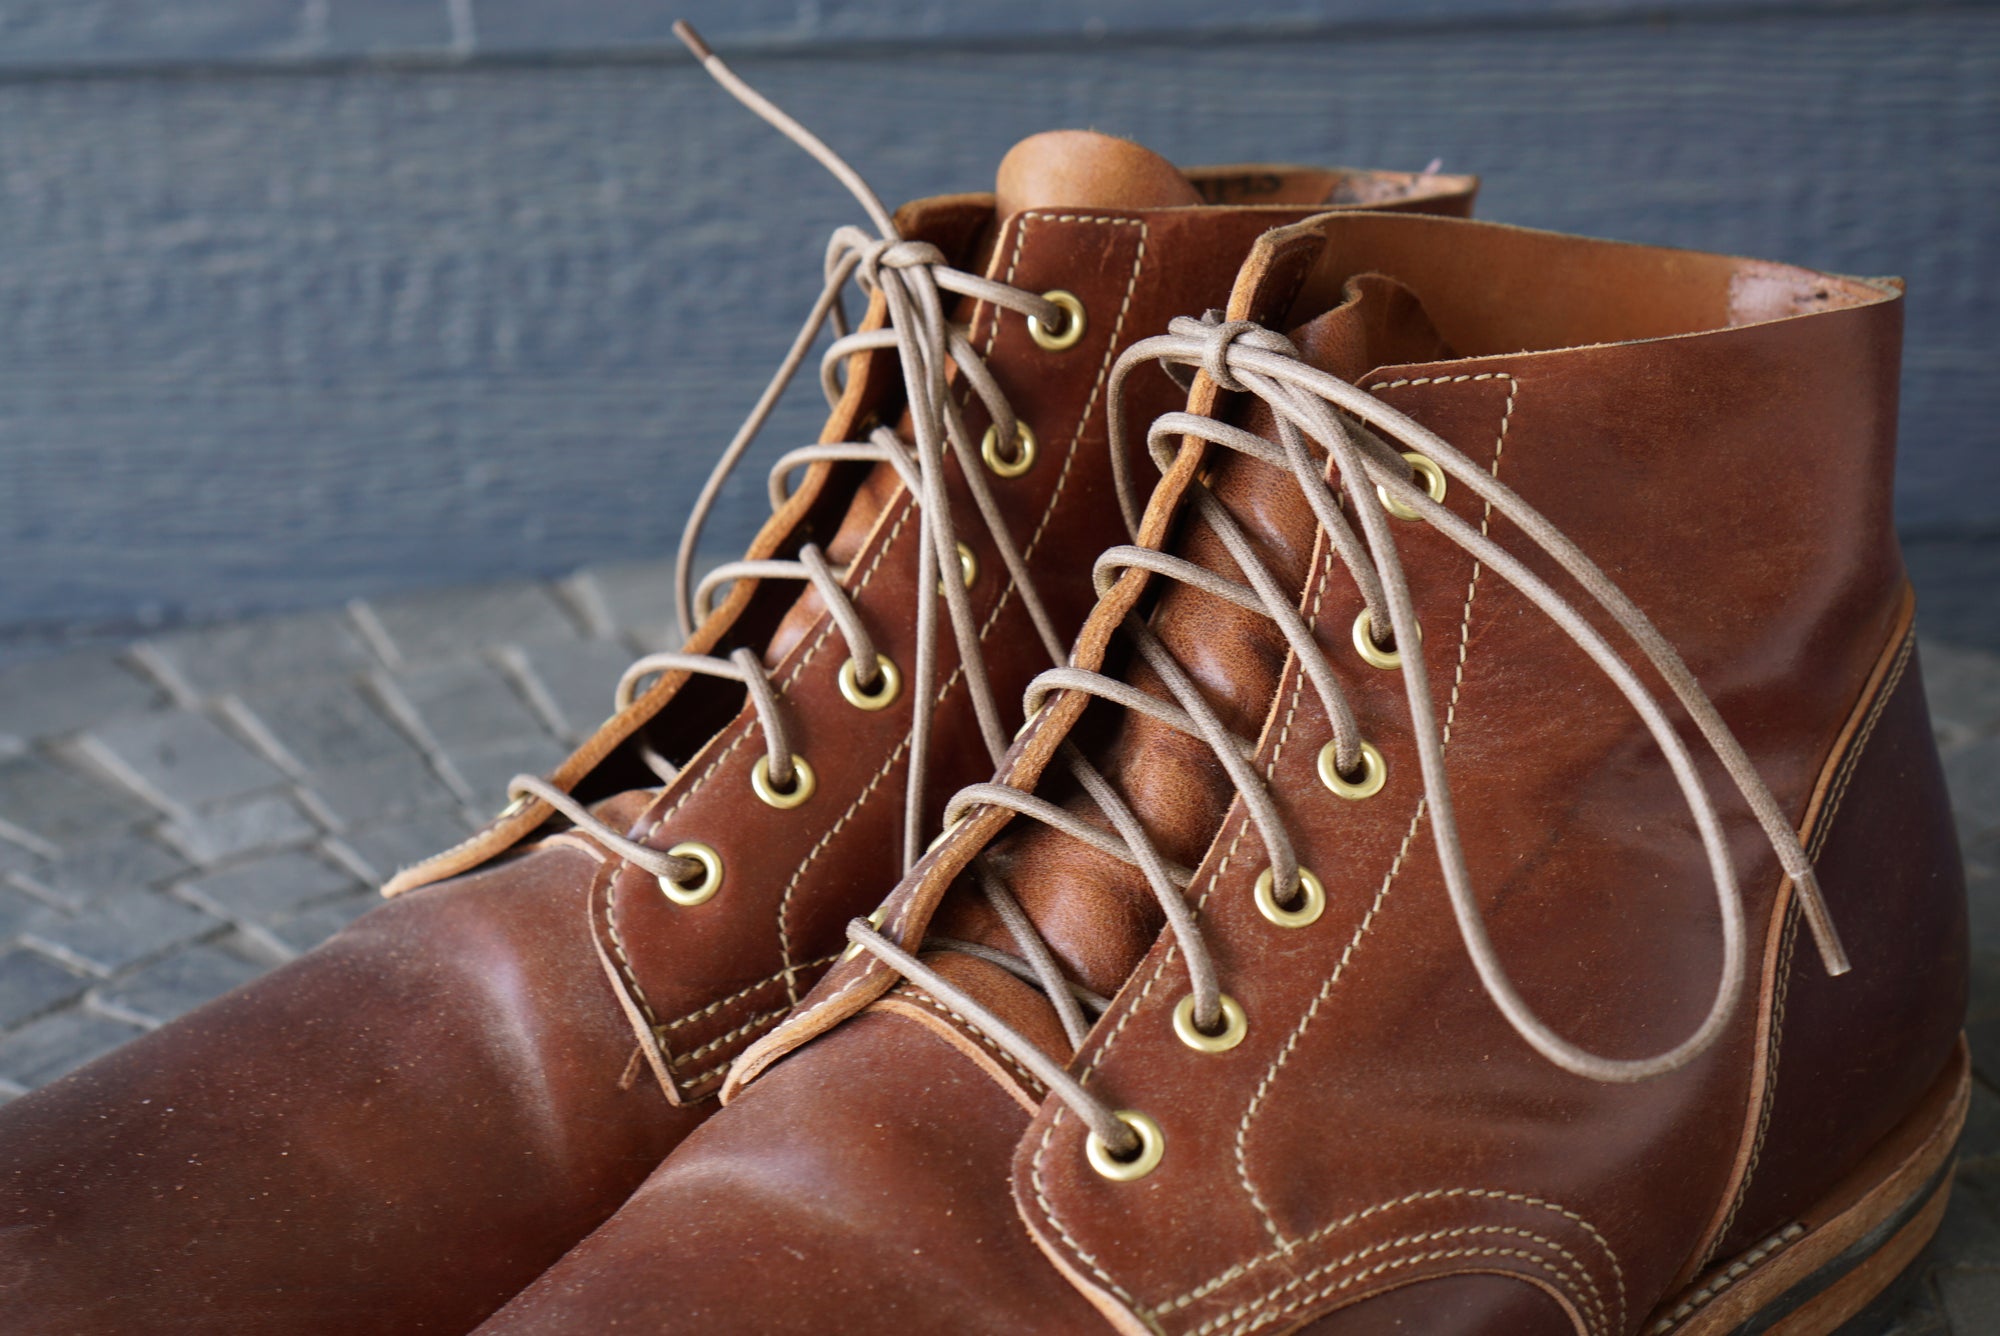 60" Extra Thick Italian Round Waxed Laces